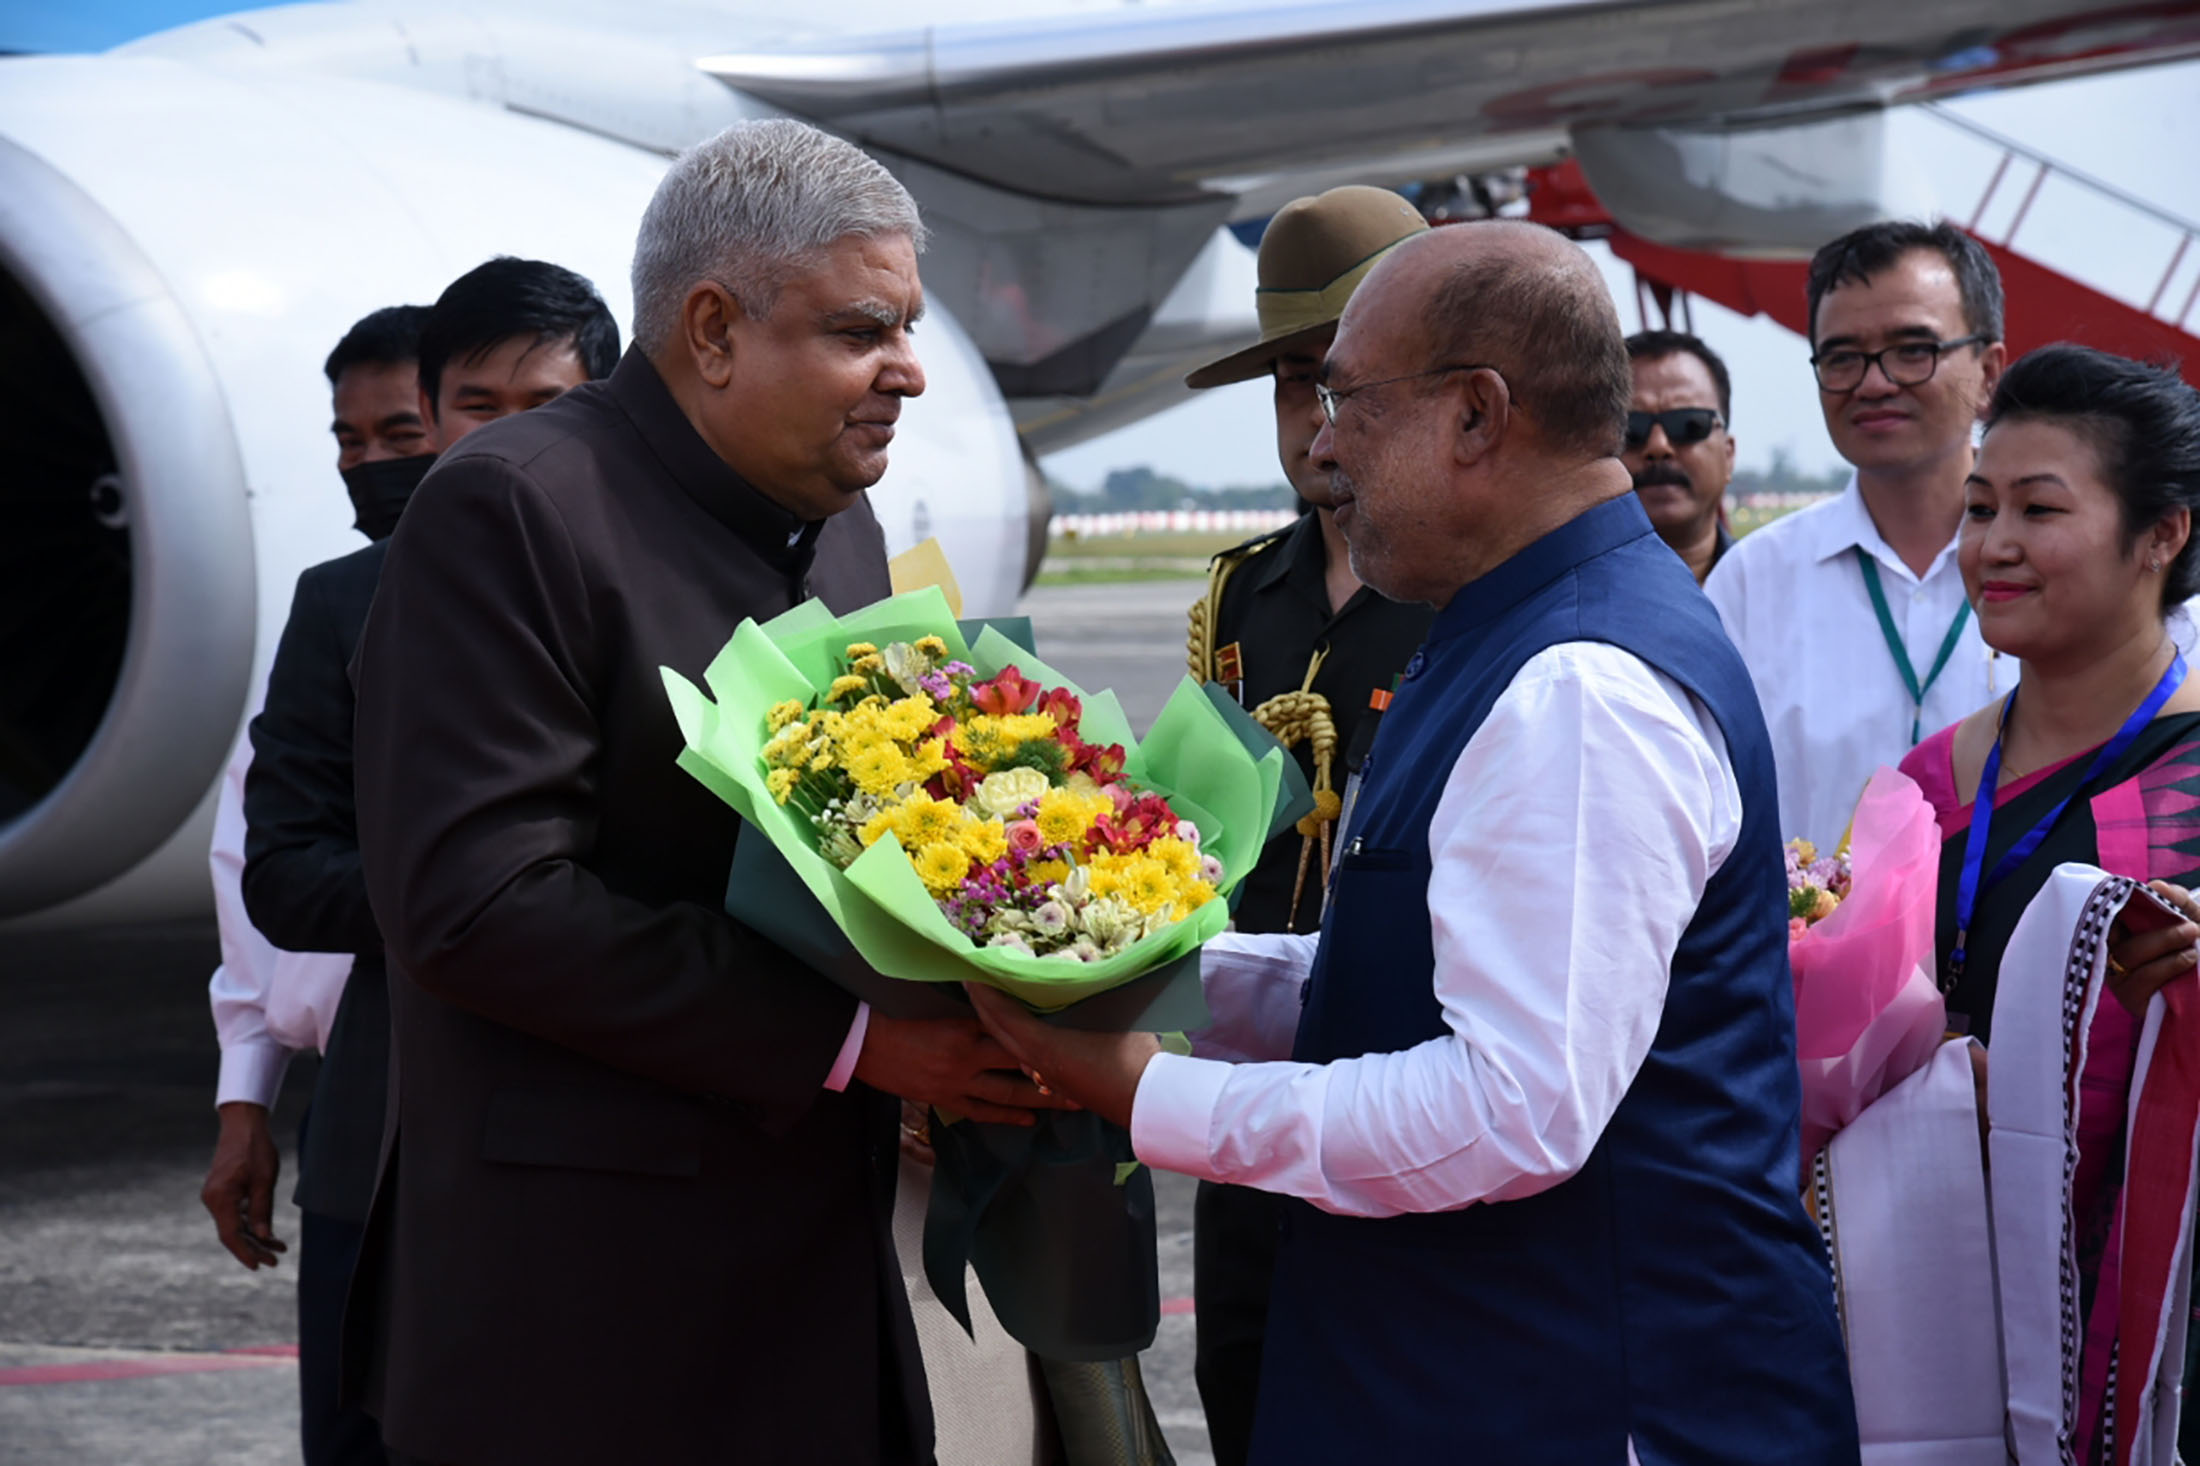 The Vice President, Shri Jagdeep Dhankhar and Dr Sudesh Dhankhar being welcomed by Ms. Anusuiya Uikey, the Governor of Manipur and Shri N. Biren Singh, Chief Minister of Manipur on their arrival in Imphal on May 3, 2023 .